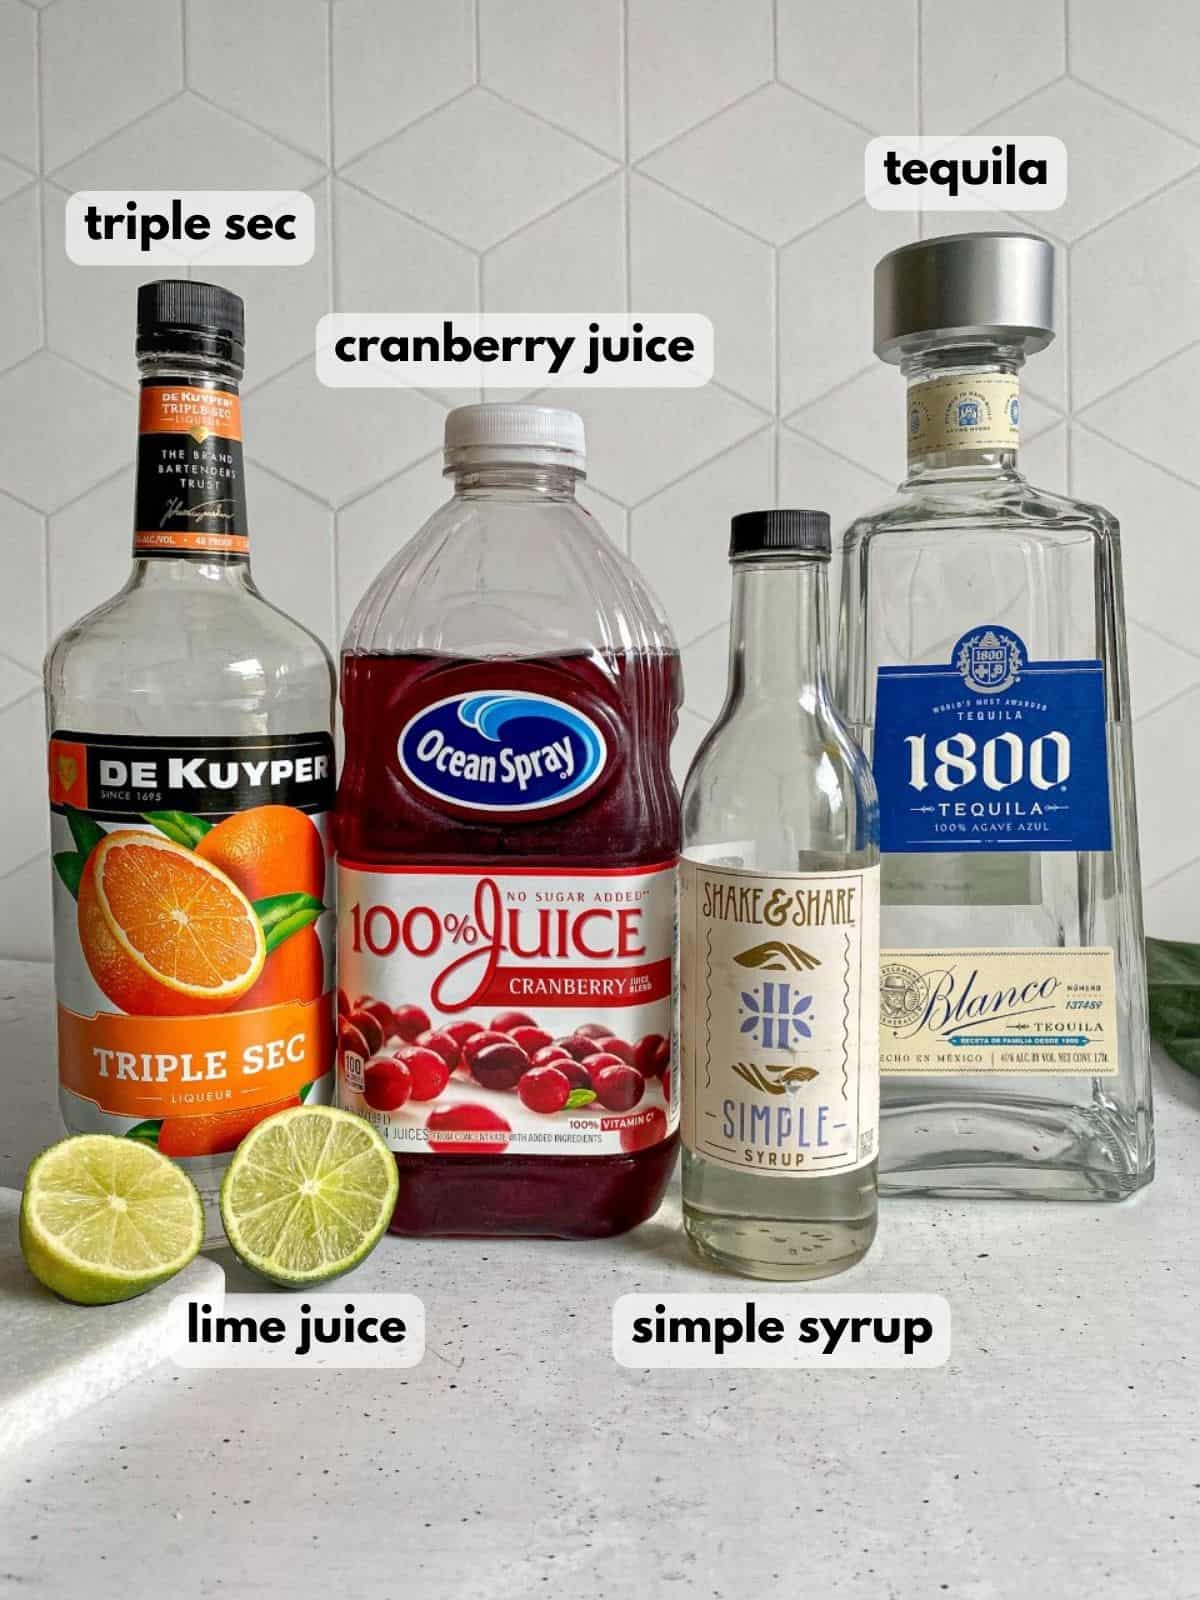 Ingredients needed to make a cranberry margarita: tequila, cranberry juice, triple sec, limes, and simple syrup.